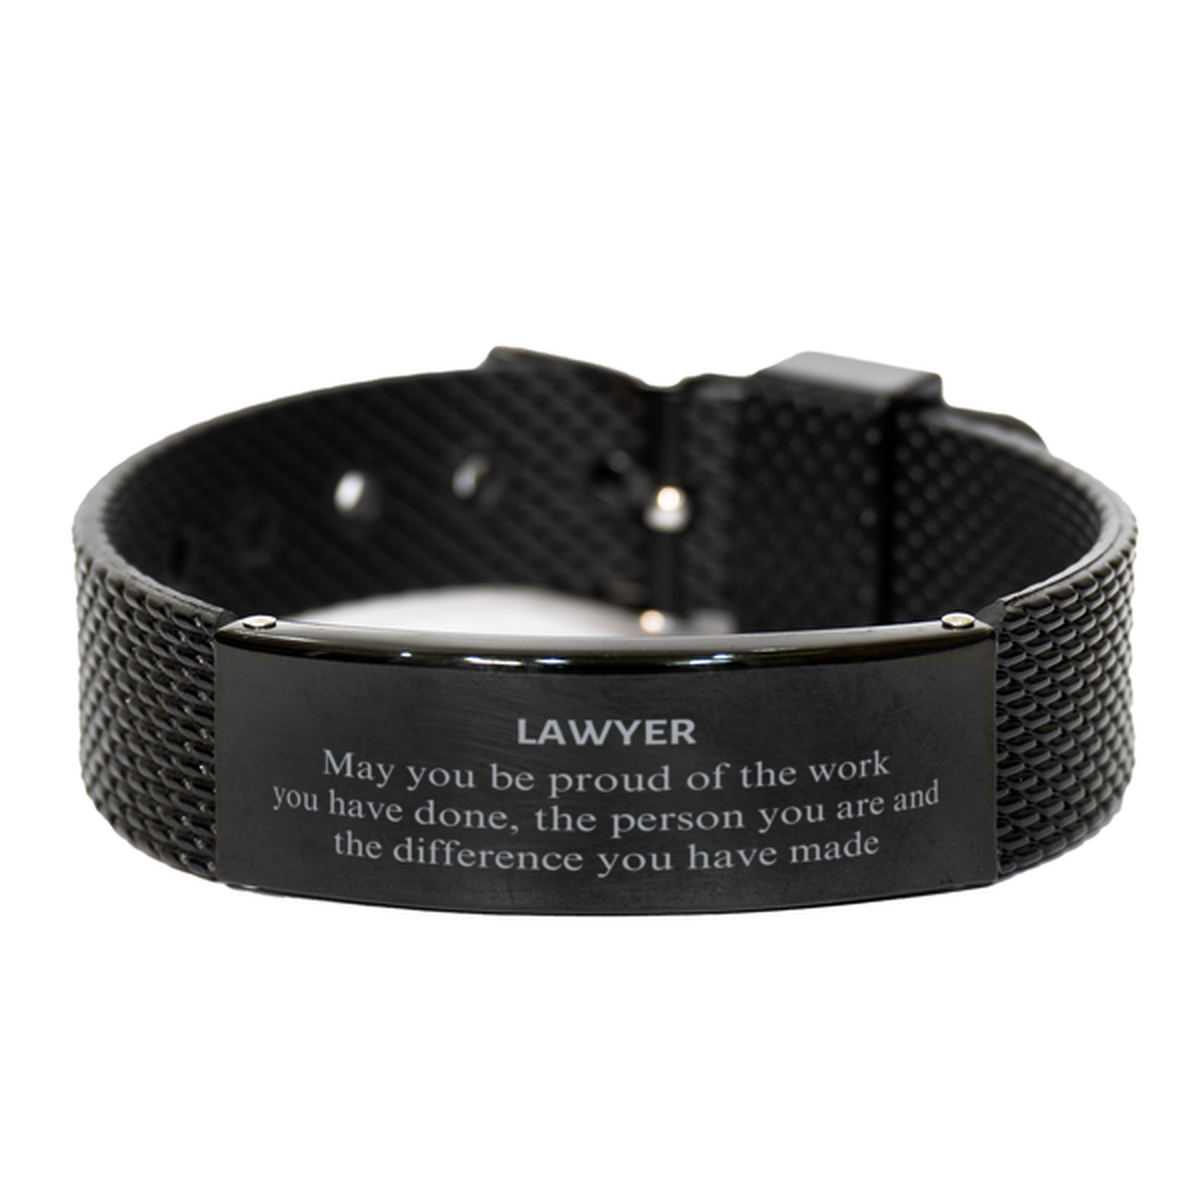 Lawyer May you be proud of the work you have done, Retirement Lawyer Black Shark Mesh Bracelet for Colleague Appreciation Gifts Amazing for Lawyer